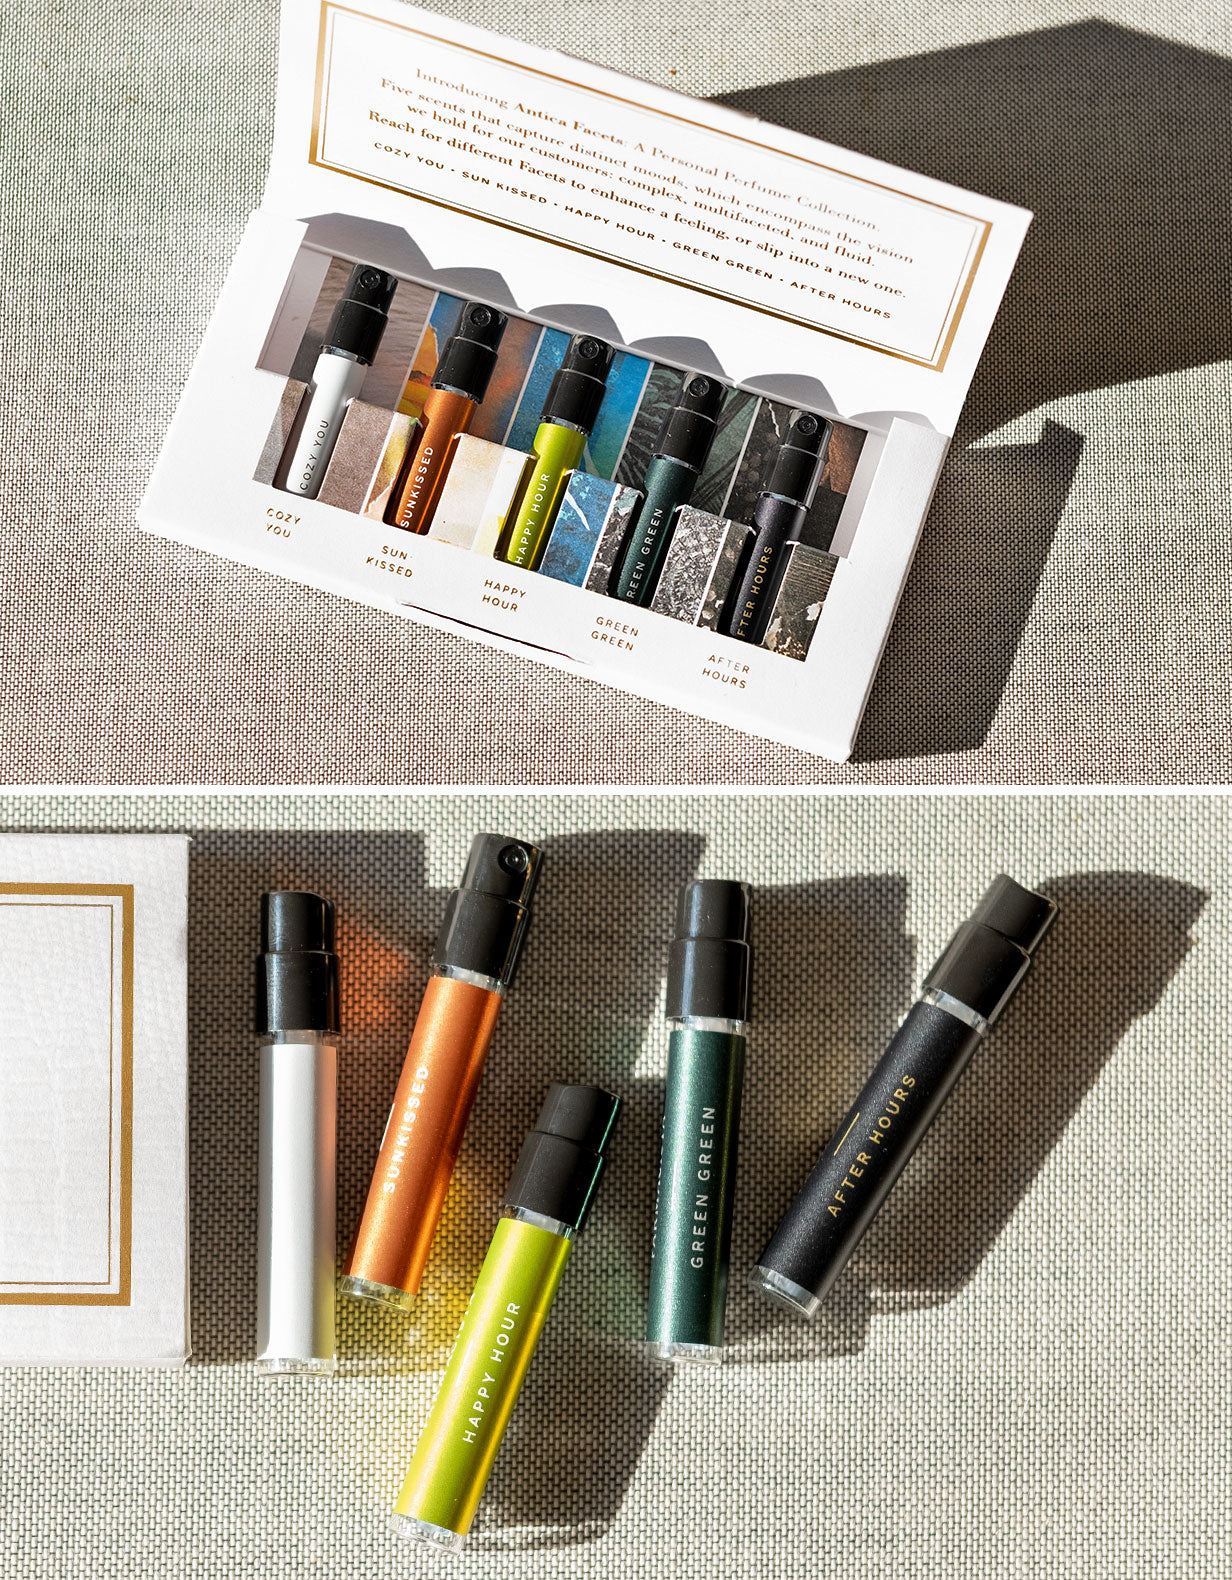 Oud Collection Discovery Sample Set